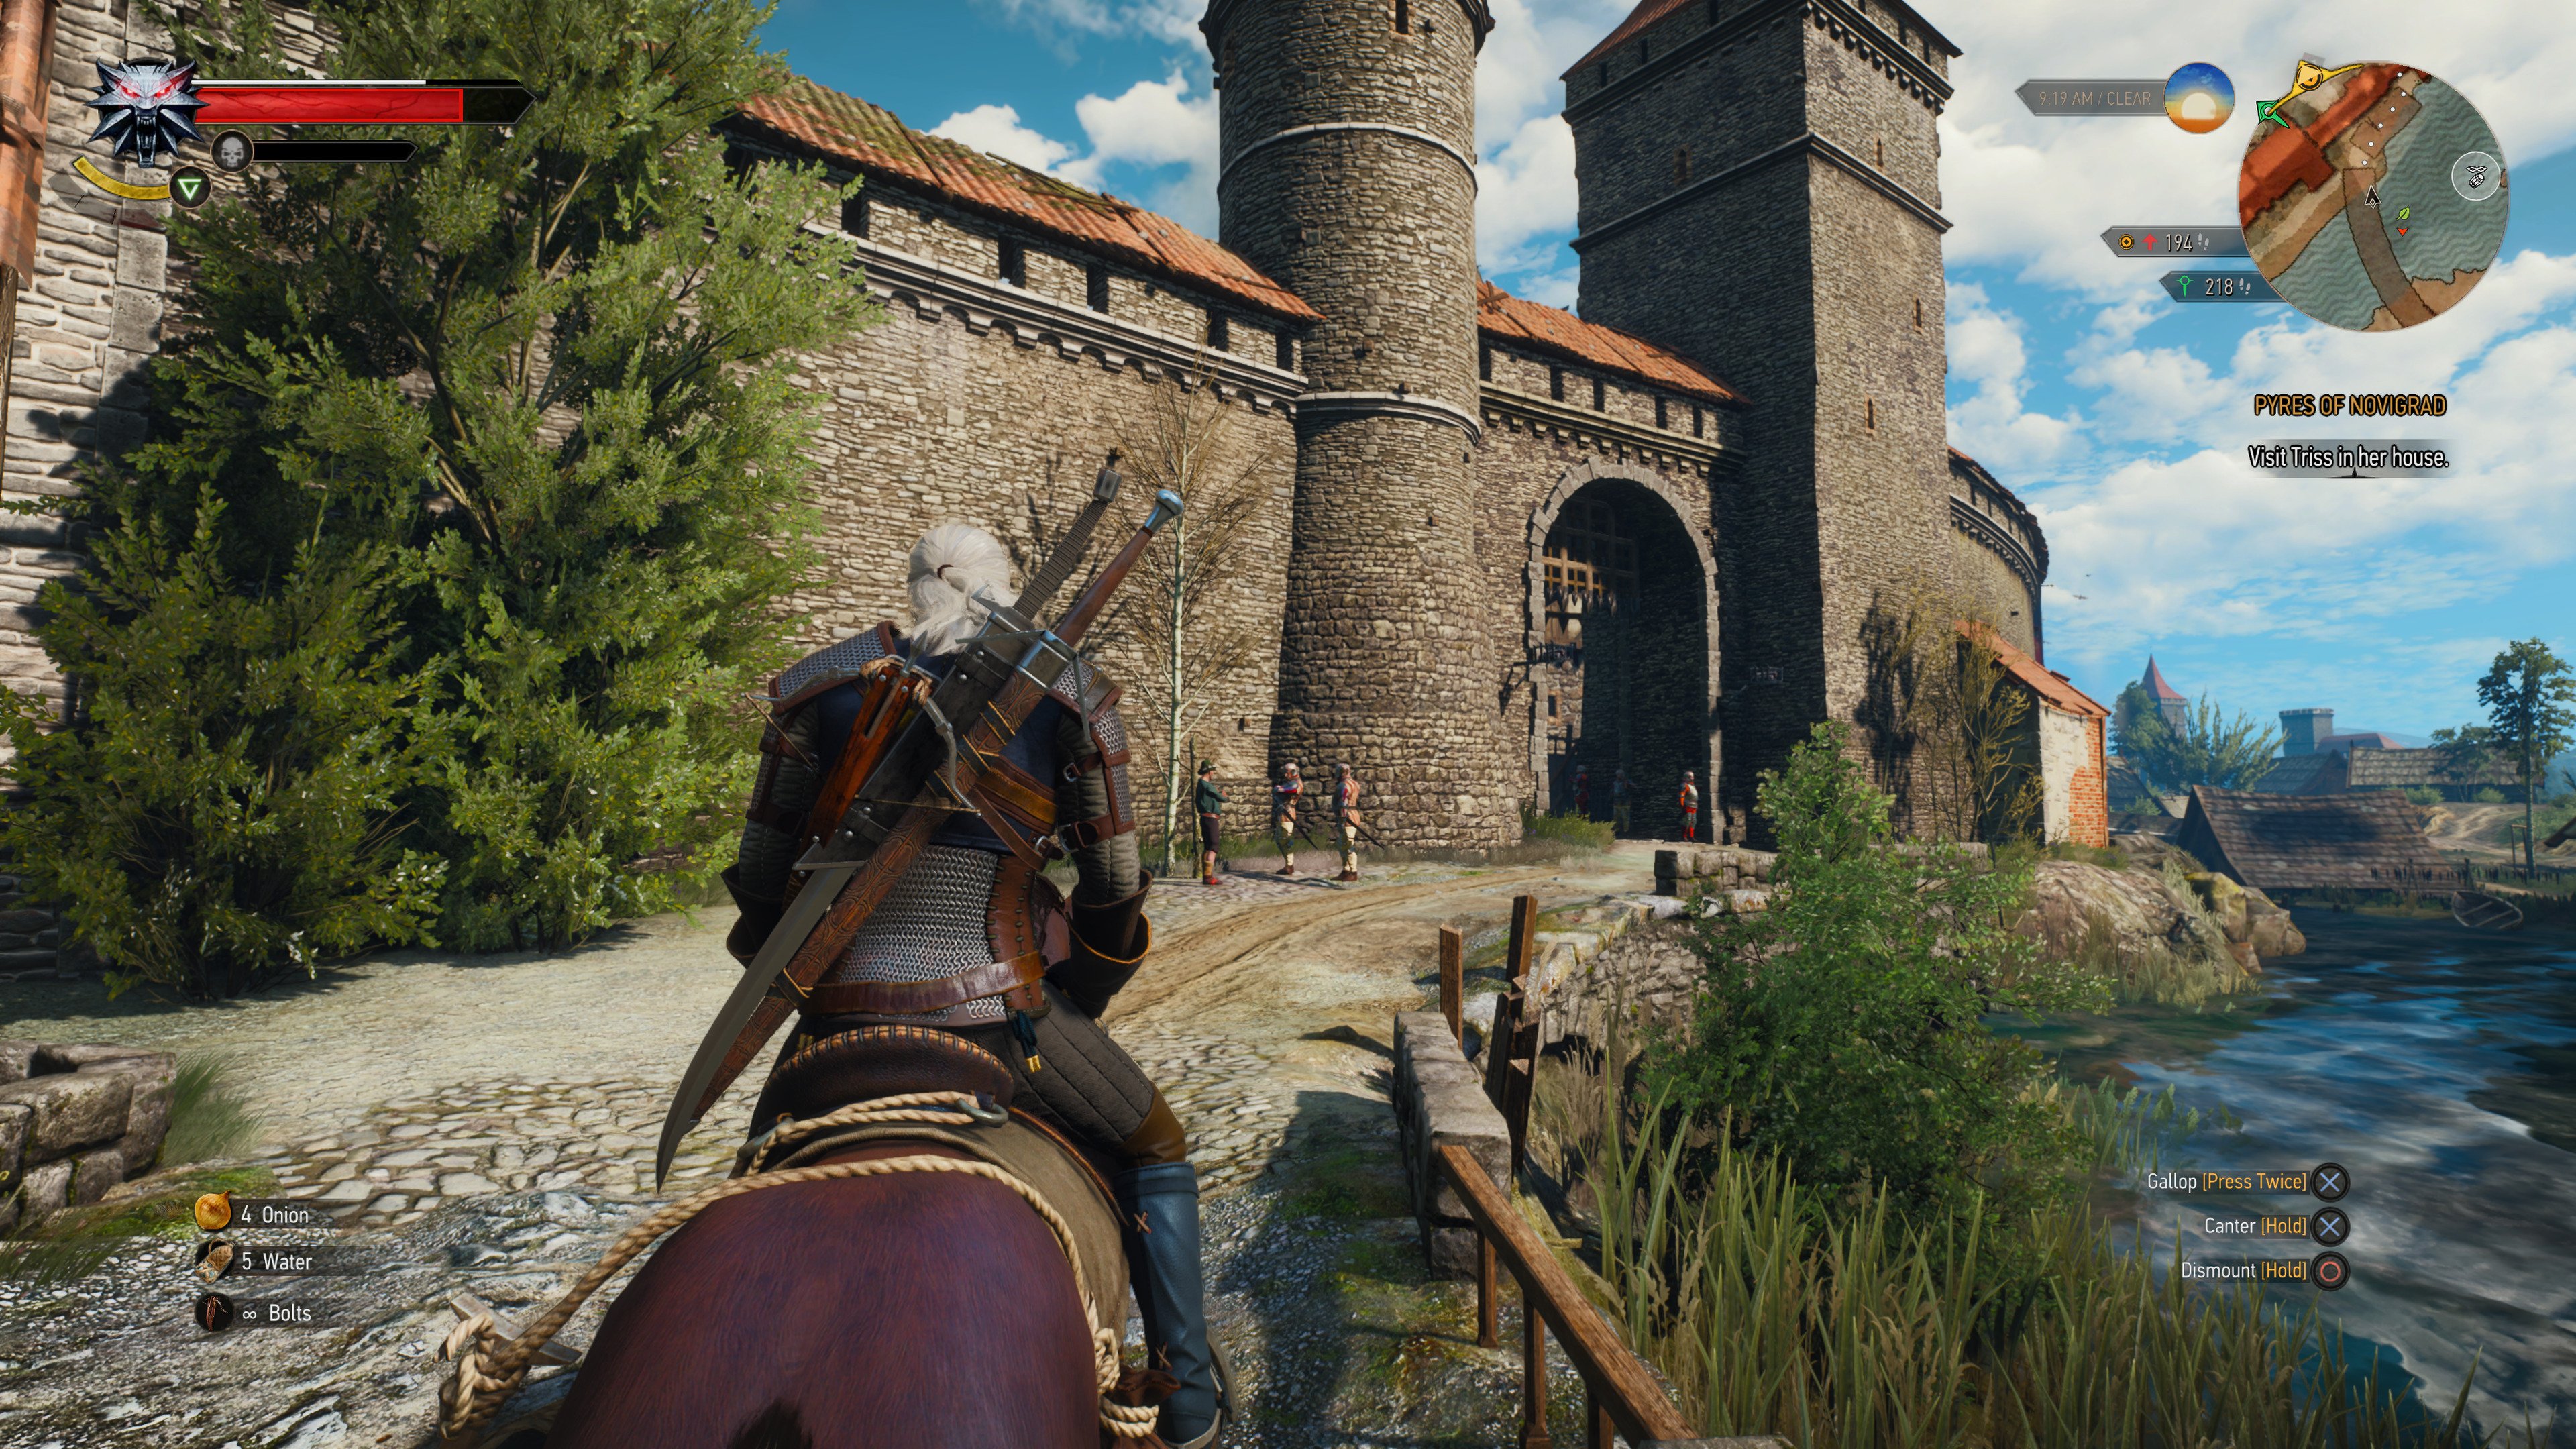 Review: Witcher 3 on PS5/XSX is the definitive version of one of